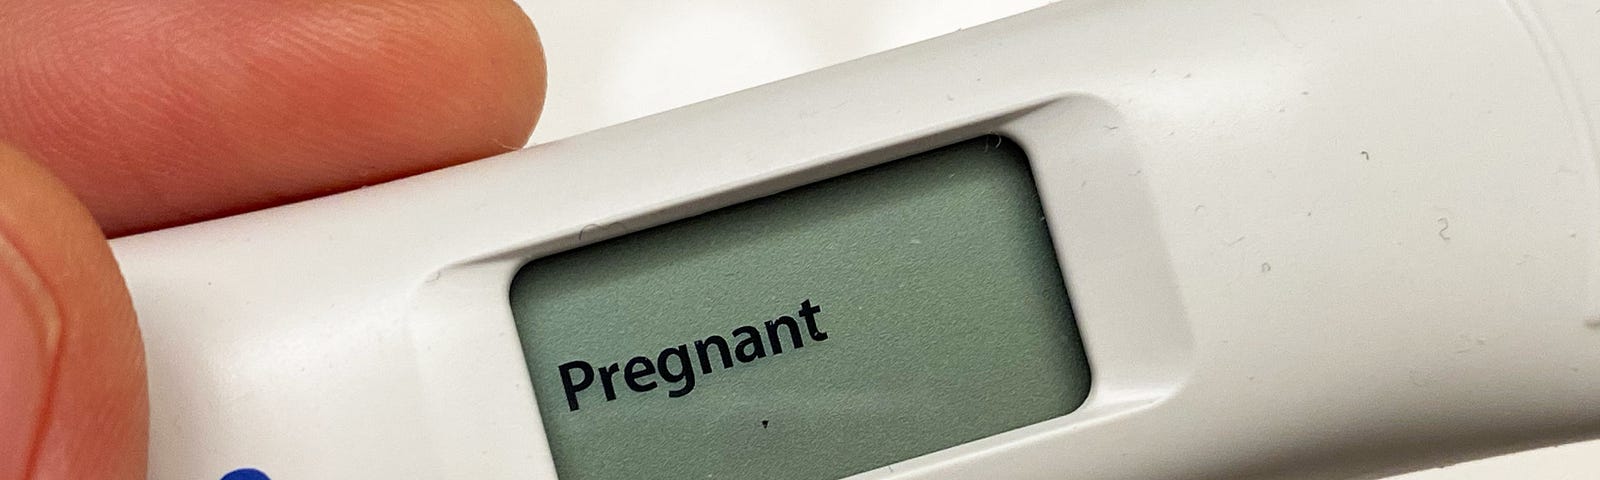 [A positive pregnancy test] On March 15, 2020, we conceived our first child.